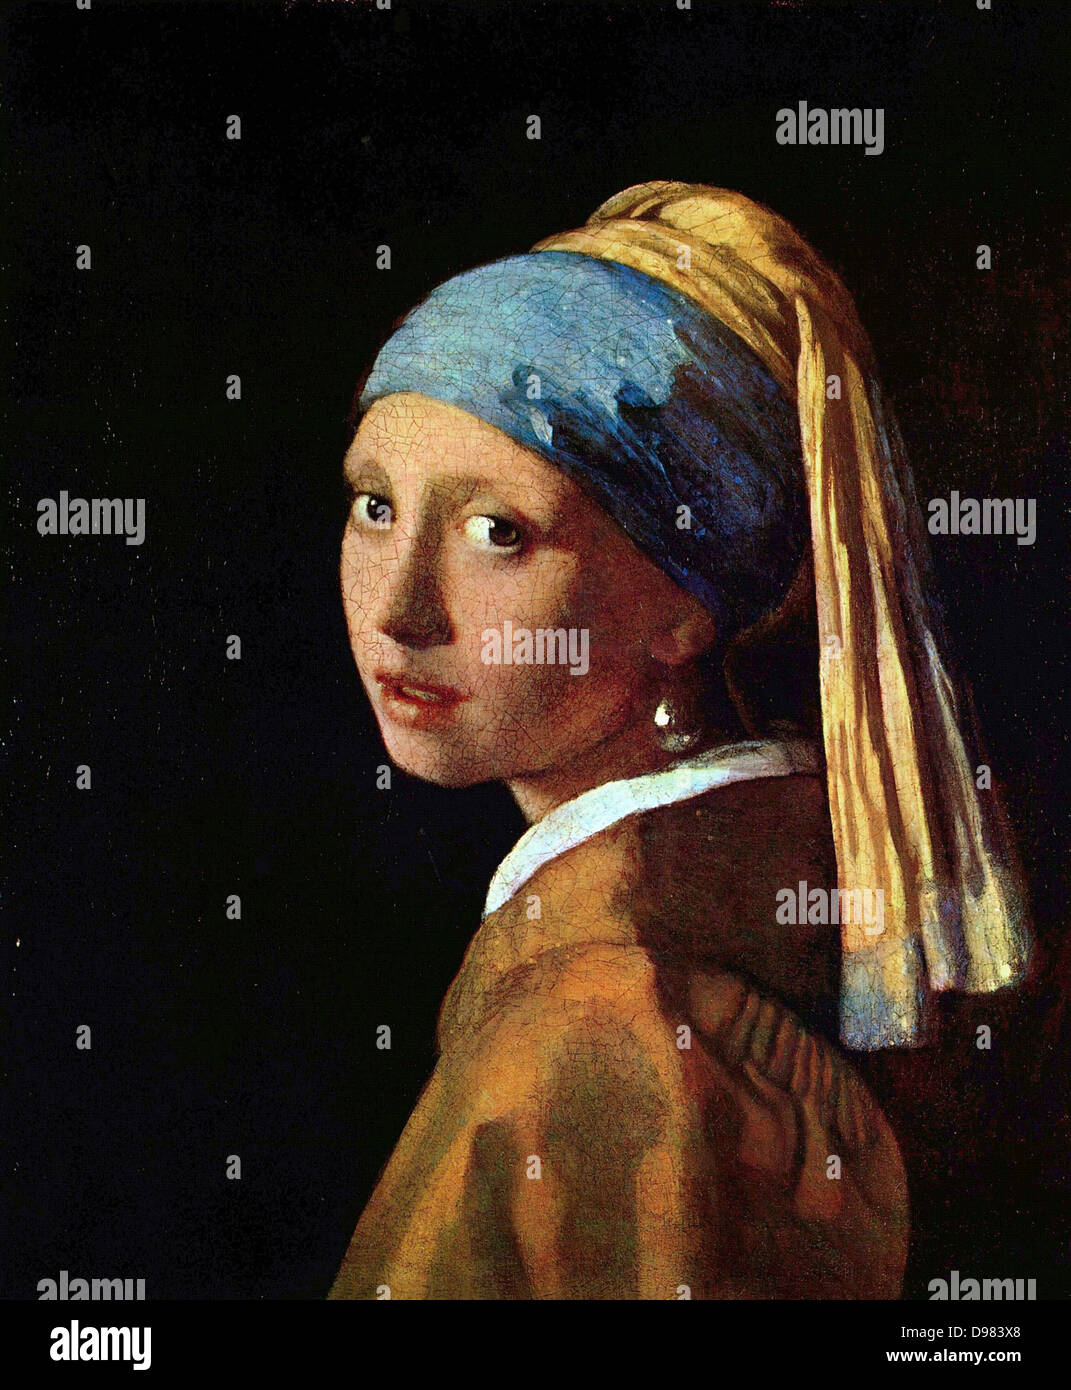 Johannes Vermeer, The Girl with a Pearl Earring 1660-1670 Oil on canvas. Royal Picture Gallery Mauritshuis, The Hague. Stock Photo